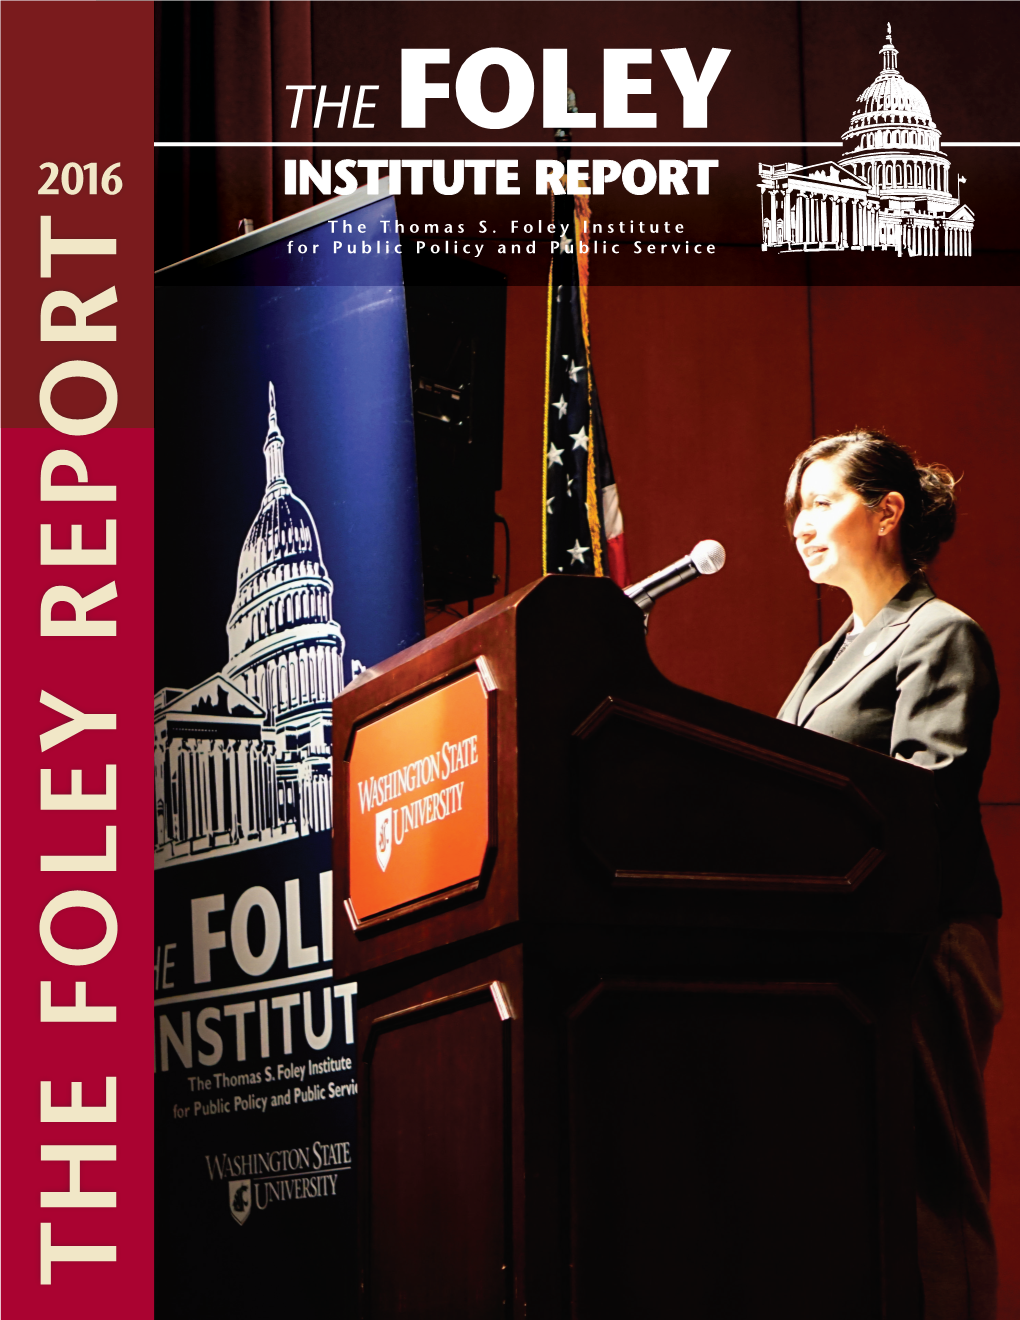 THE FOLEY REPORT Director’S Update